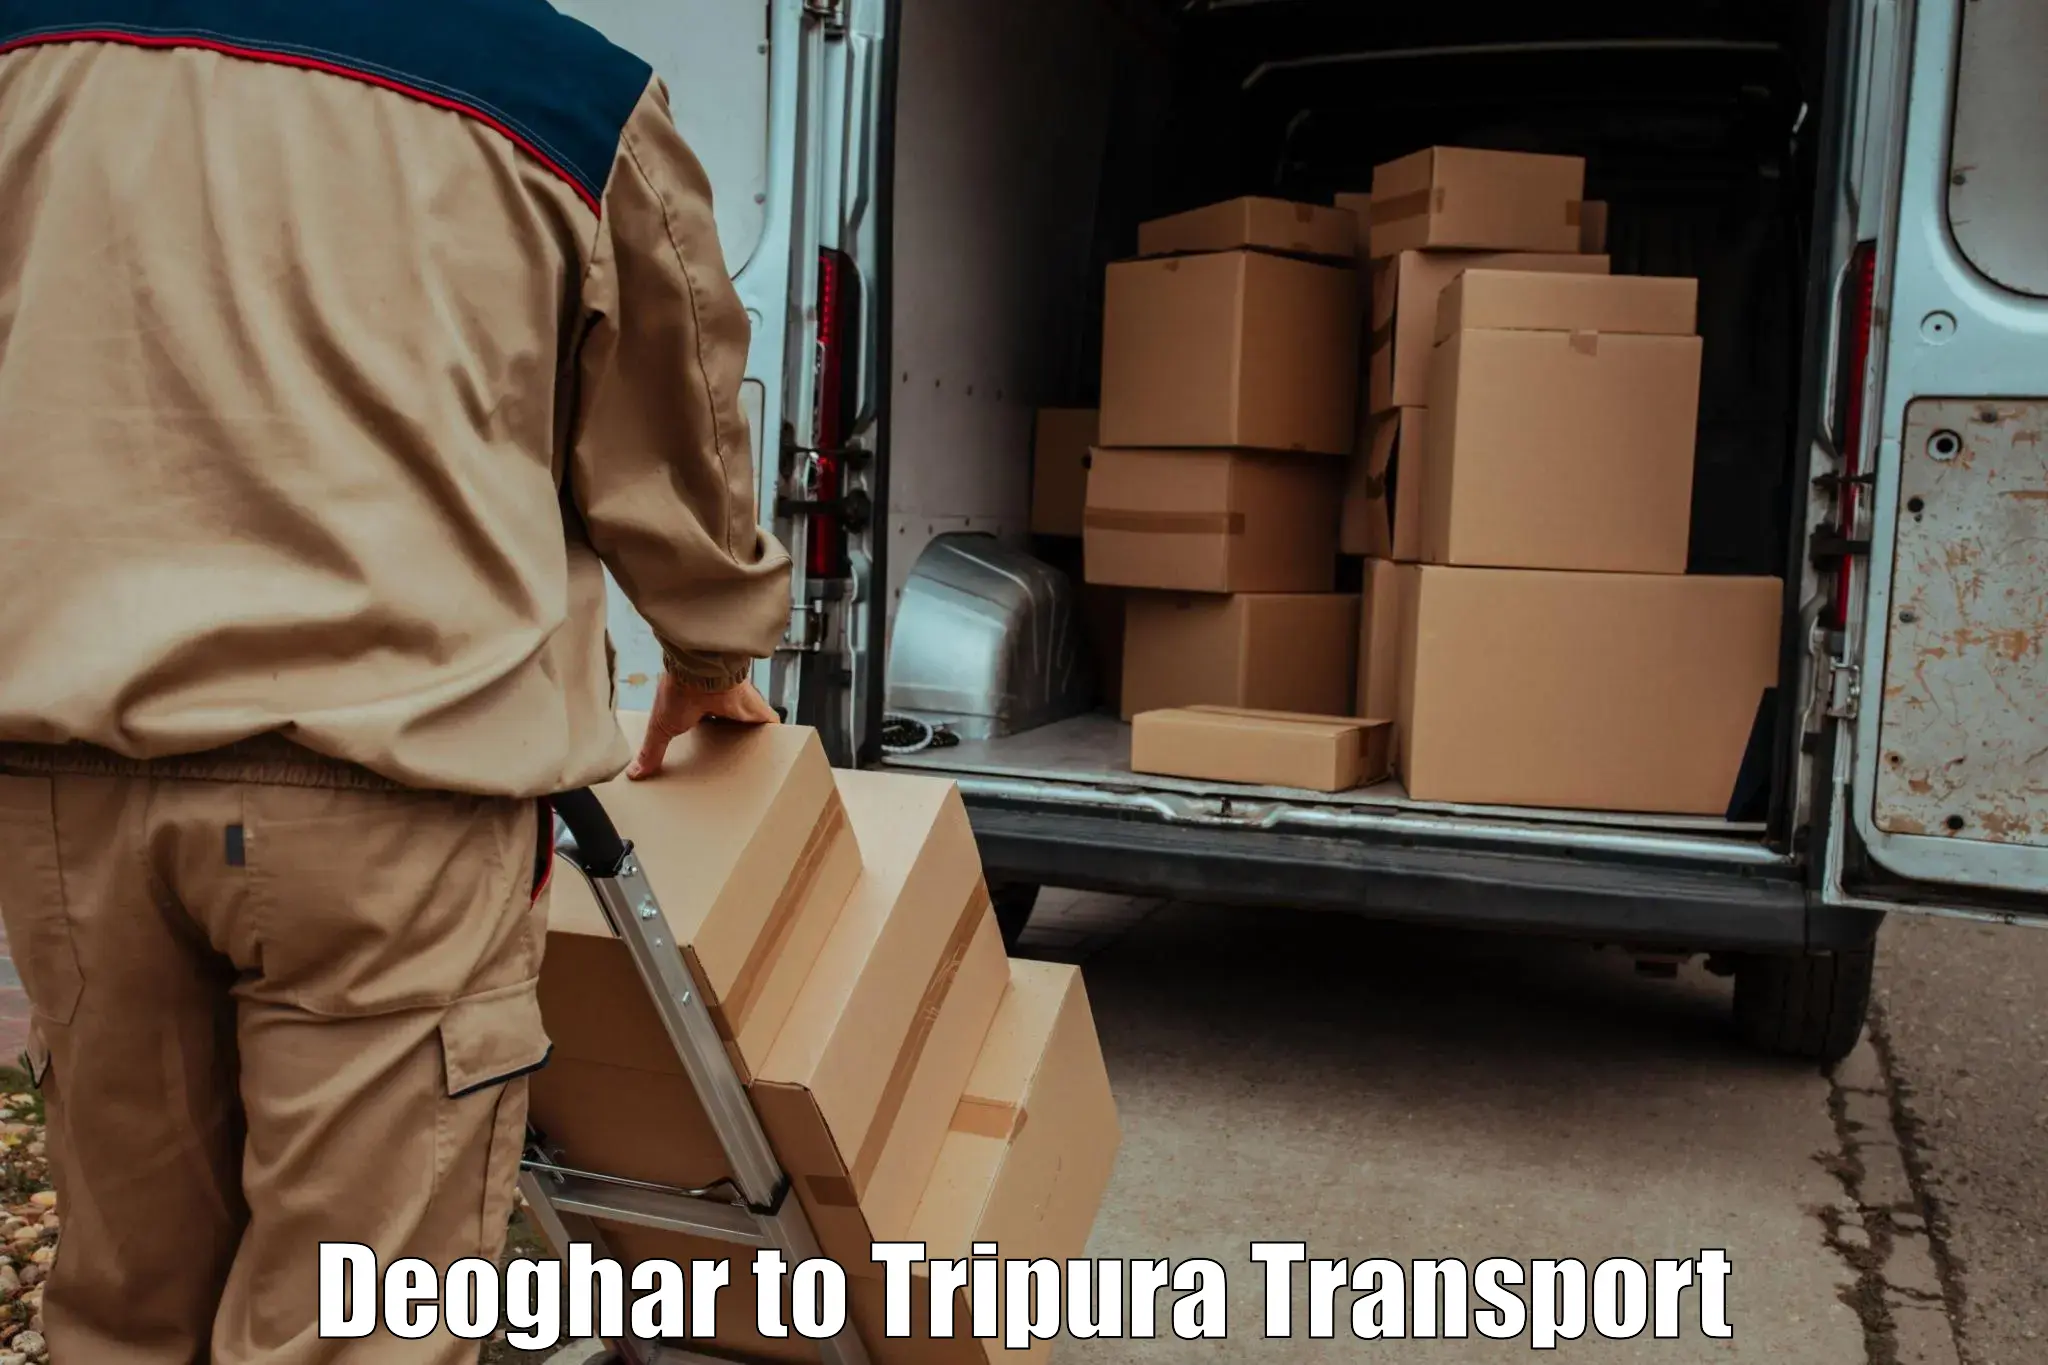 Pick up transport service Deoghar to Khowai